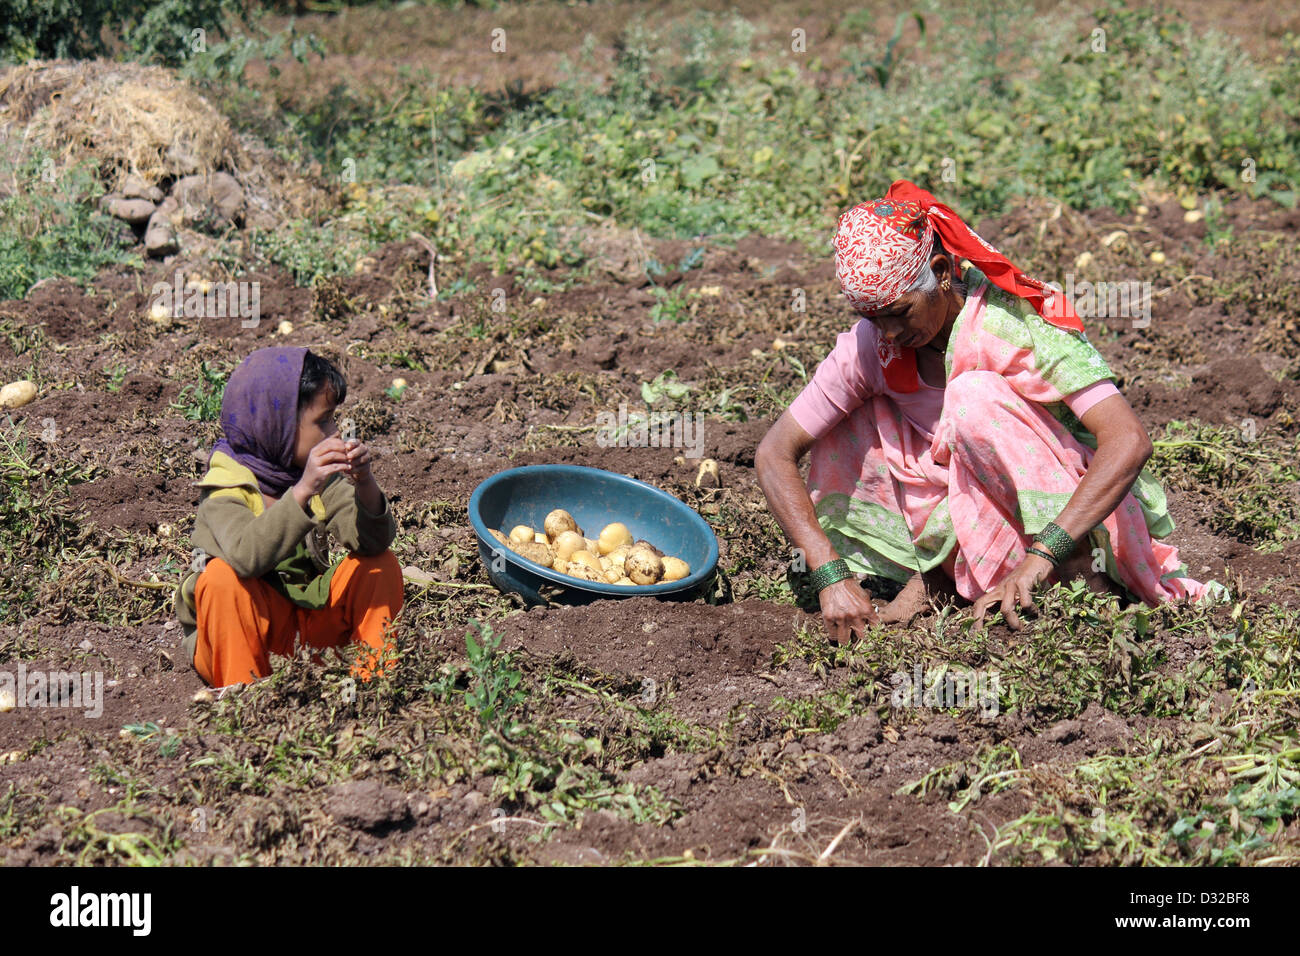 Farmers removing potatoes from field Stock Photo